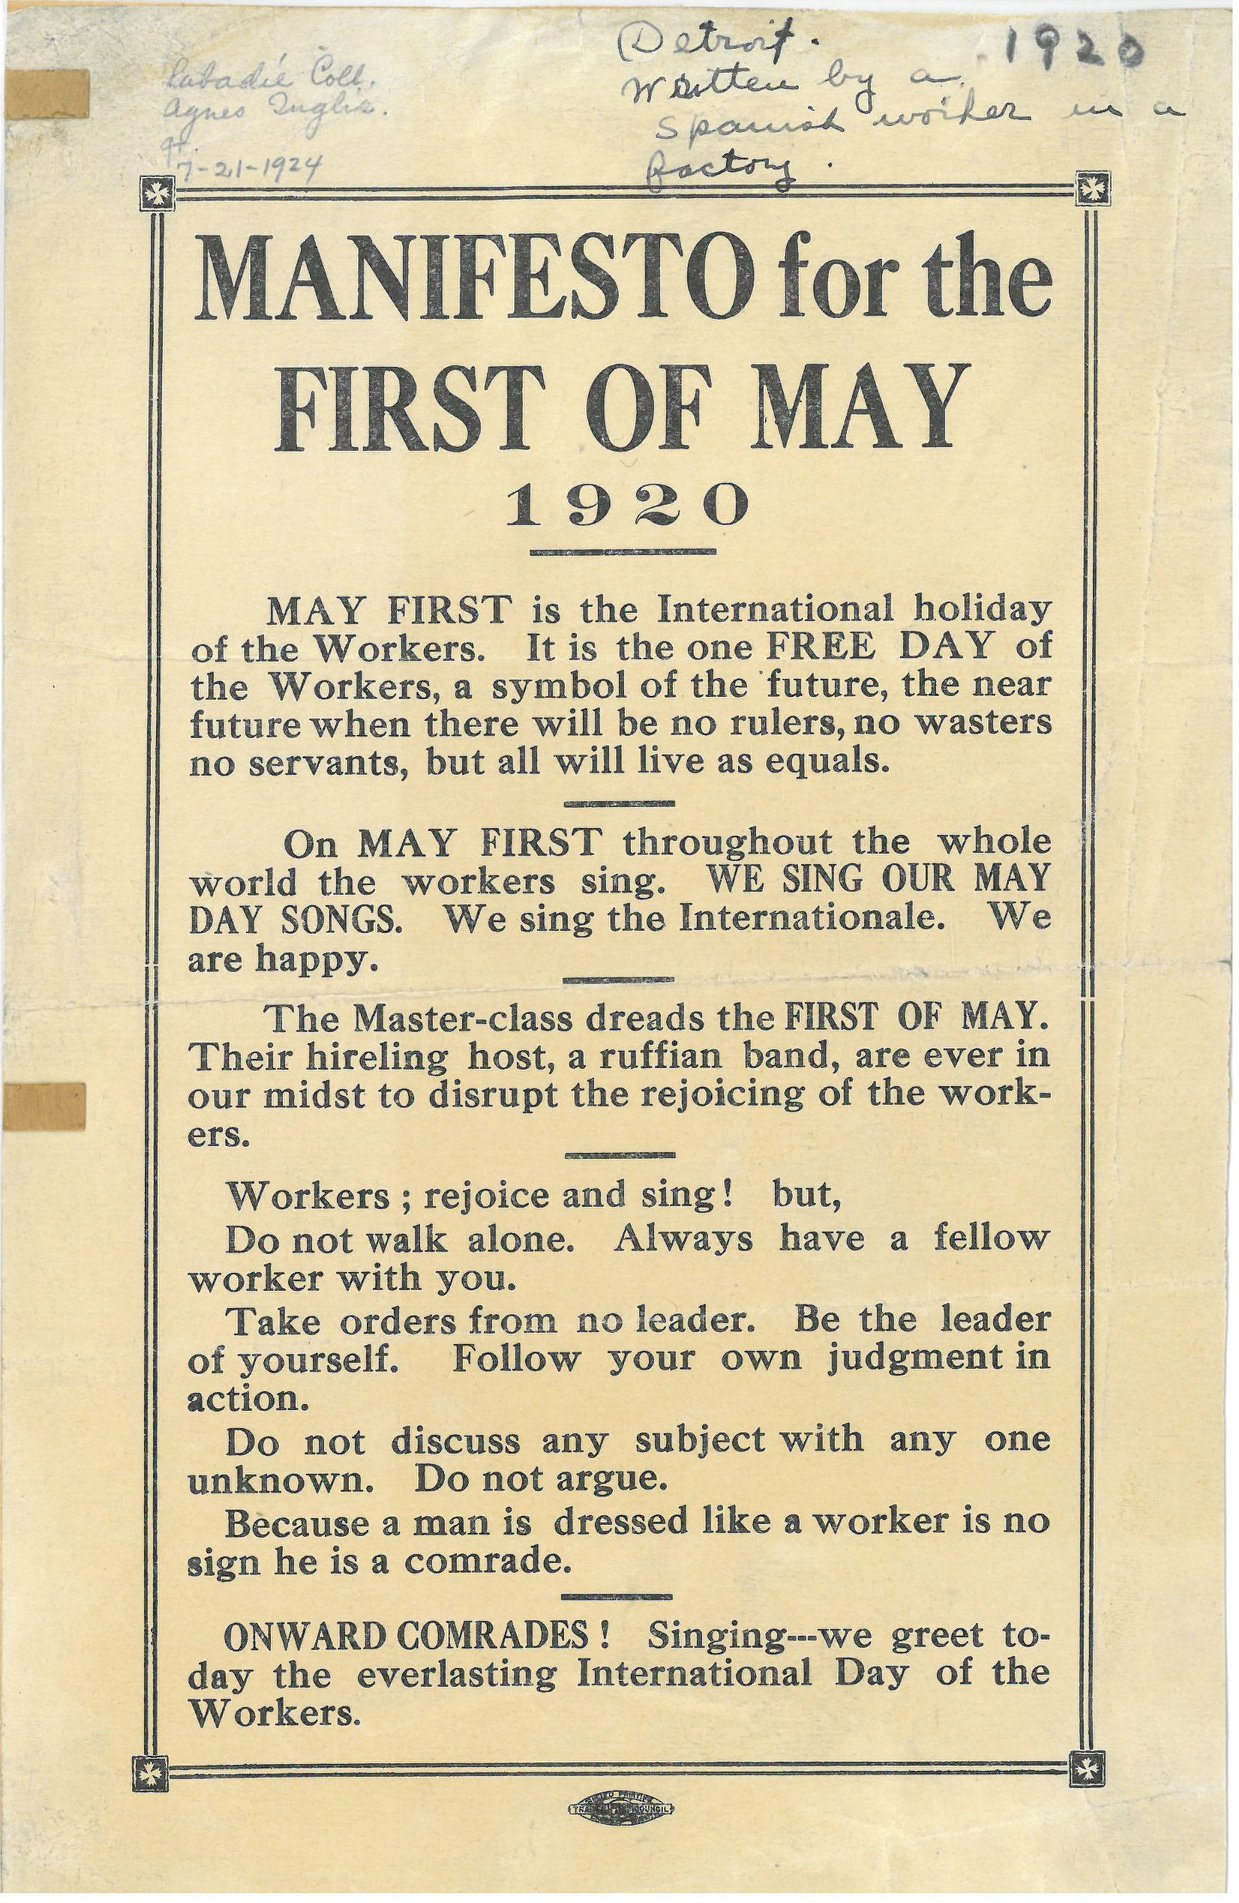 This May Day flyer was added to the Labadie Collection in 1924 by its curator, Agnes Inglis, who received it from a Spanish factory worker in Detroit.